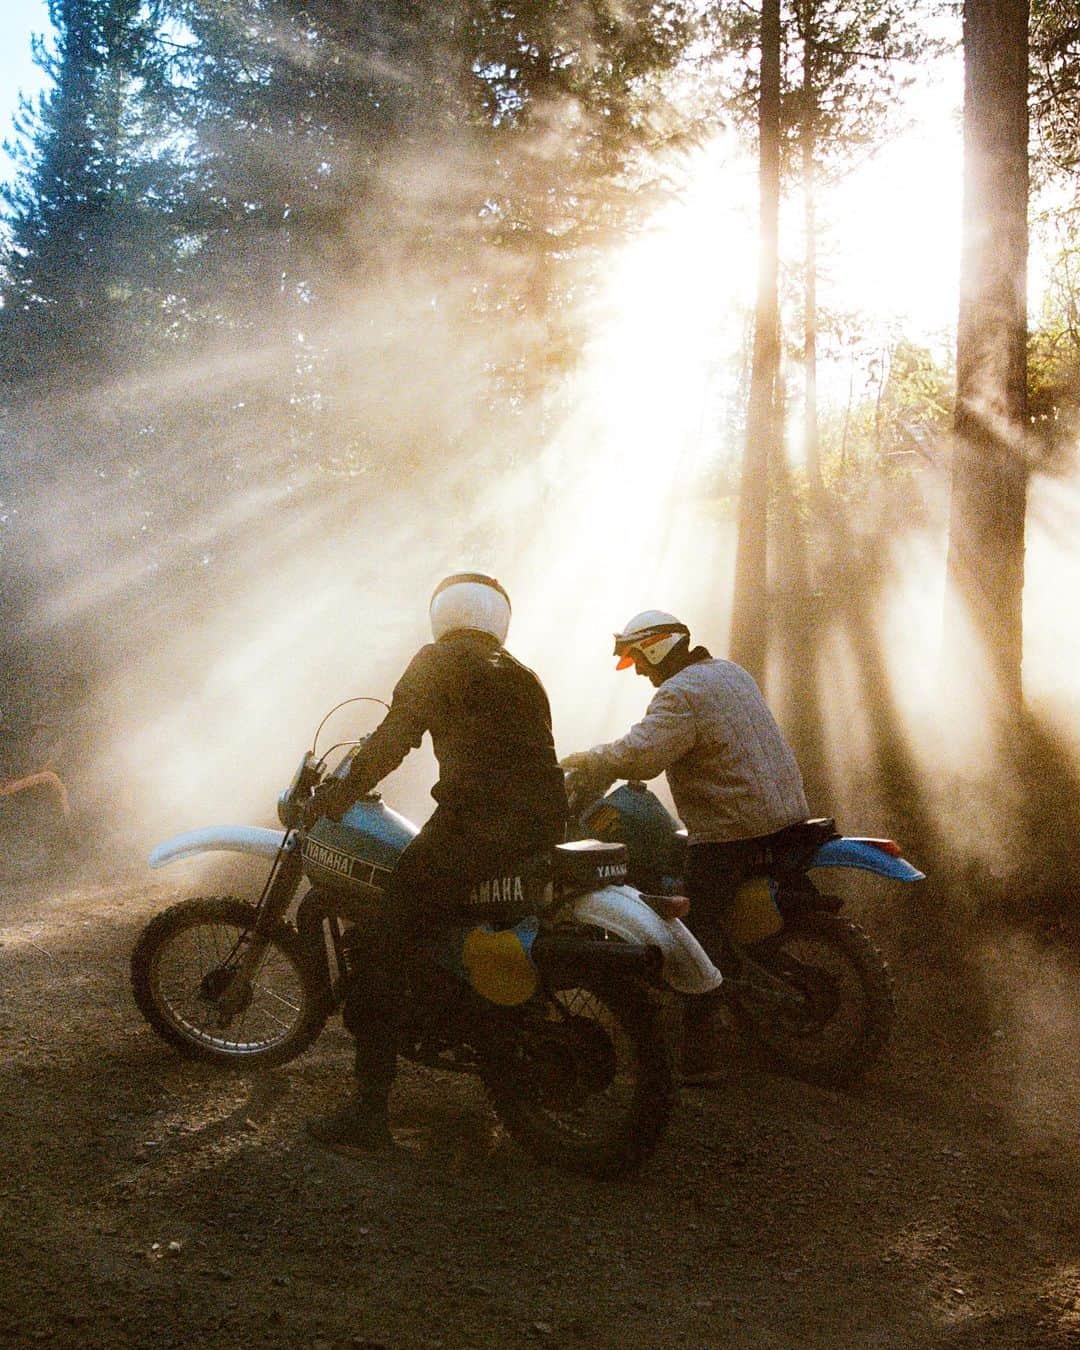 Alex Strohlのインスタグラム：「One last farewell to summer  Finally able to share this series I  shot for @meta’s 20th issue. Since we were going to be riding old dirt bikes I thought it was de rigueur to document it all on film.   I’ll have to admit that there was a few restless days waiting for the 7 rolls of film to come back from @statefilm.   @meta’s @bengiese wrote a delightful essay of our trip through Montana’s back roads - read at the link in bio.   Thankful for an all time group of new and old friends who like the simpler things in life such as 2 stroke oil, campfires and a night under the stars @isaacsjohnston @thiswildidea @elibclark @bengiese @calebstasko」